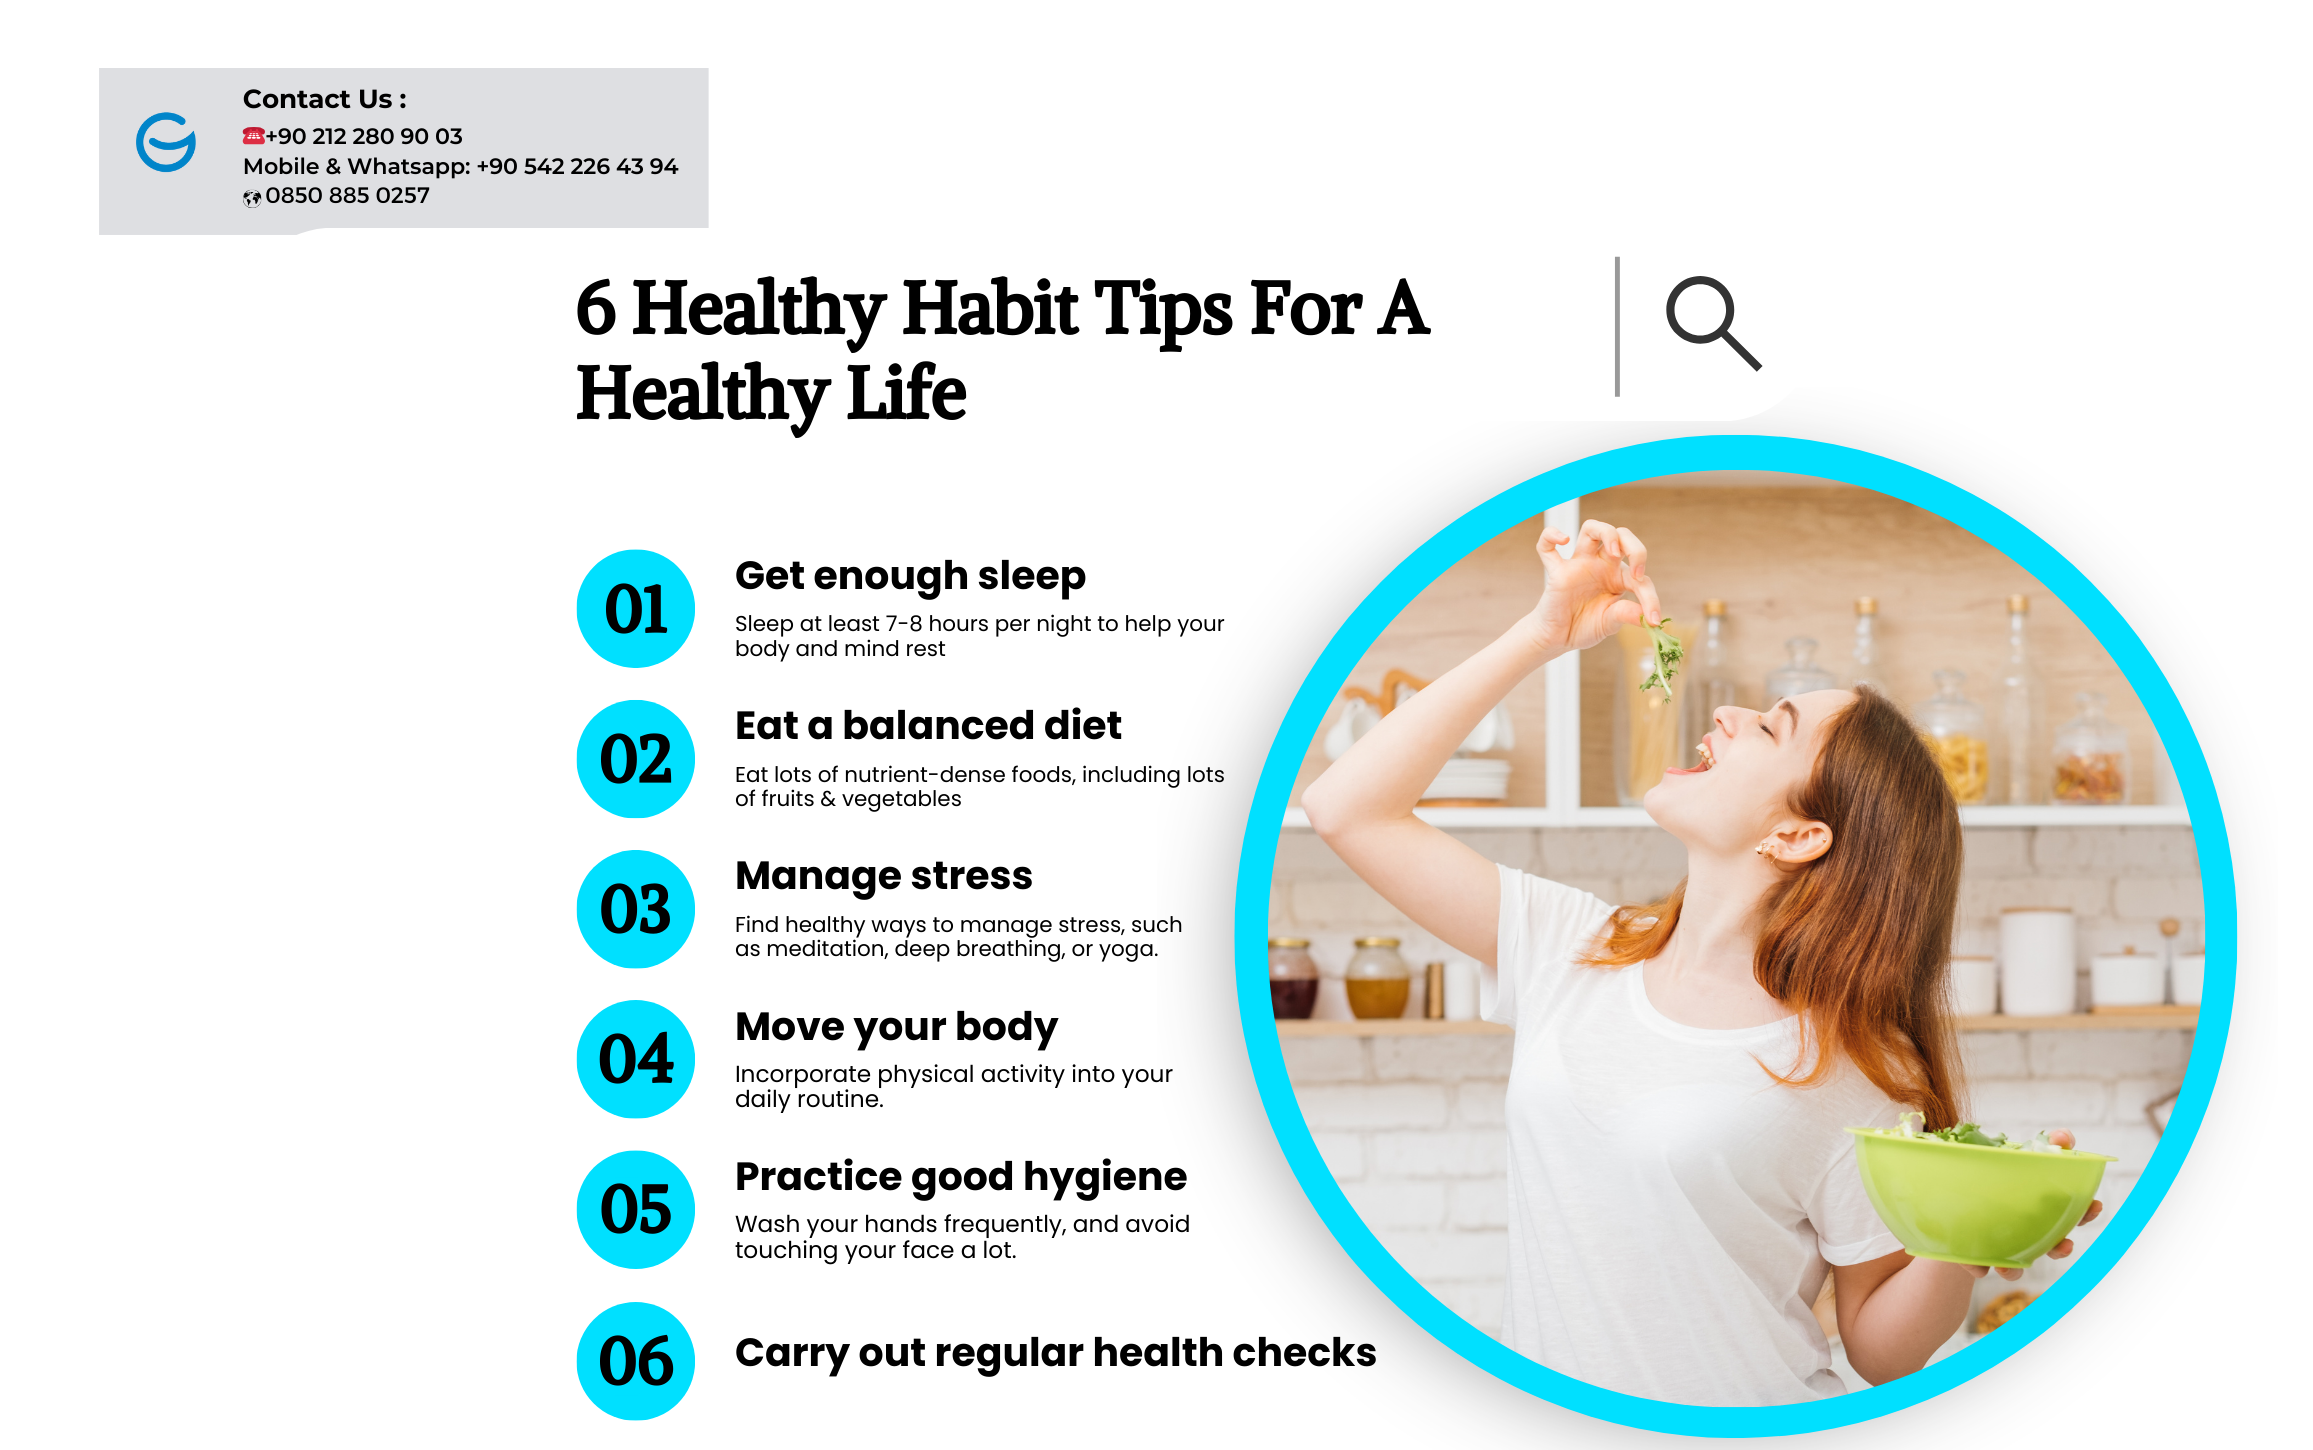 6 Healthy Habit Tips For A Healthy Life